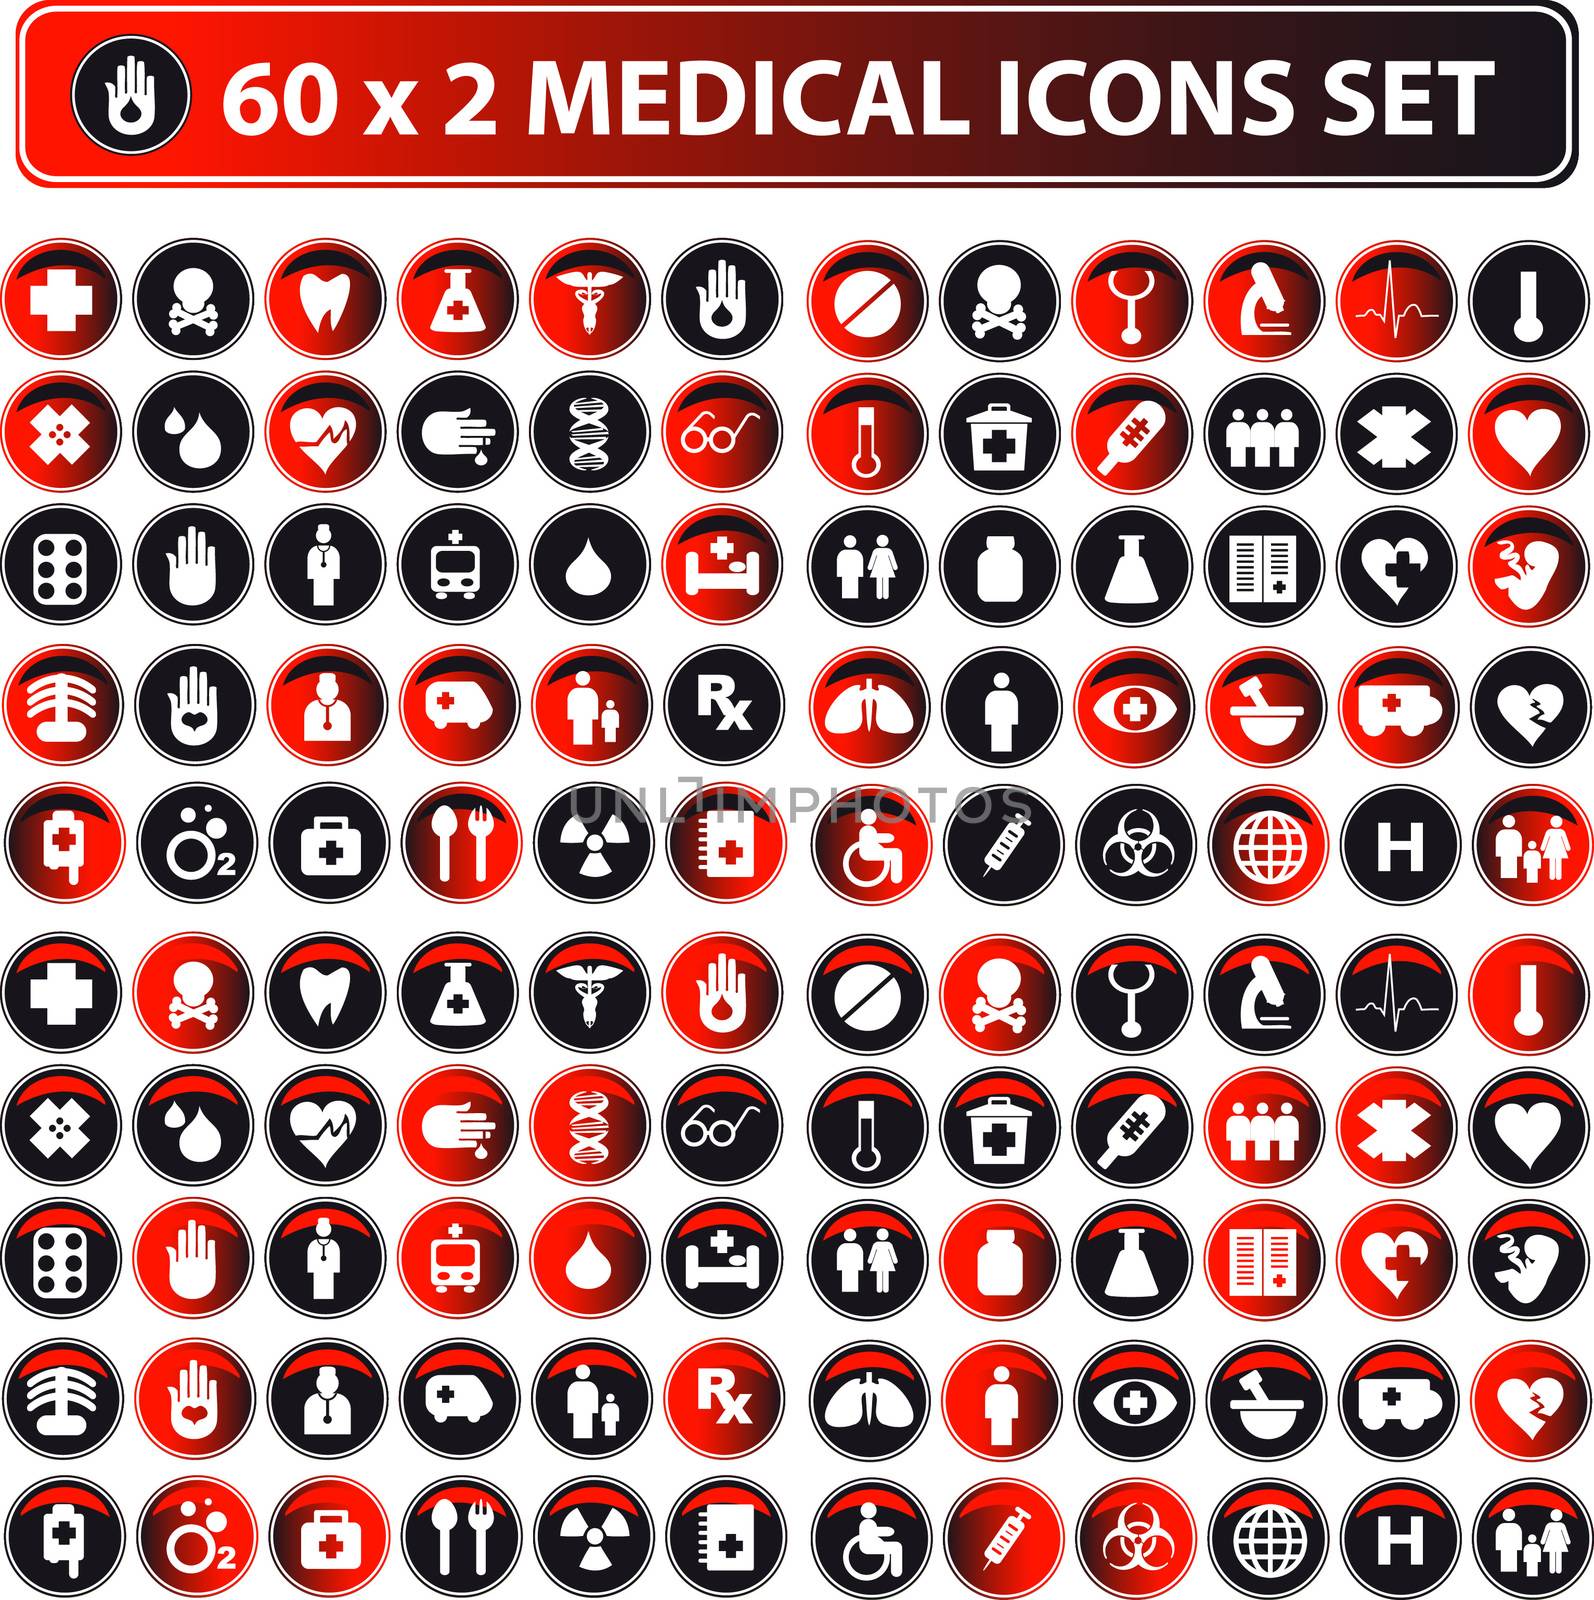 60x2 shiny Medical icons, button web set, eco color by IconsJewelry